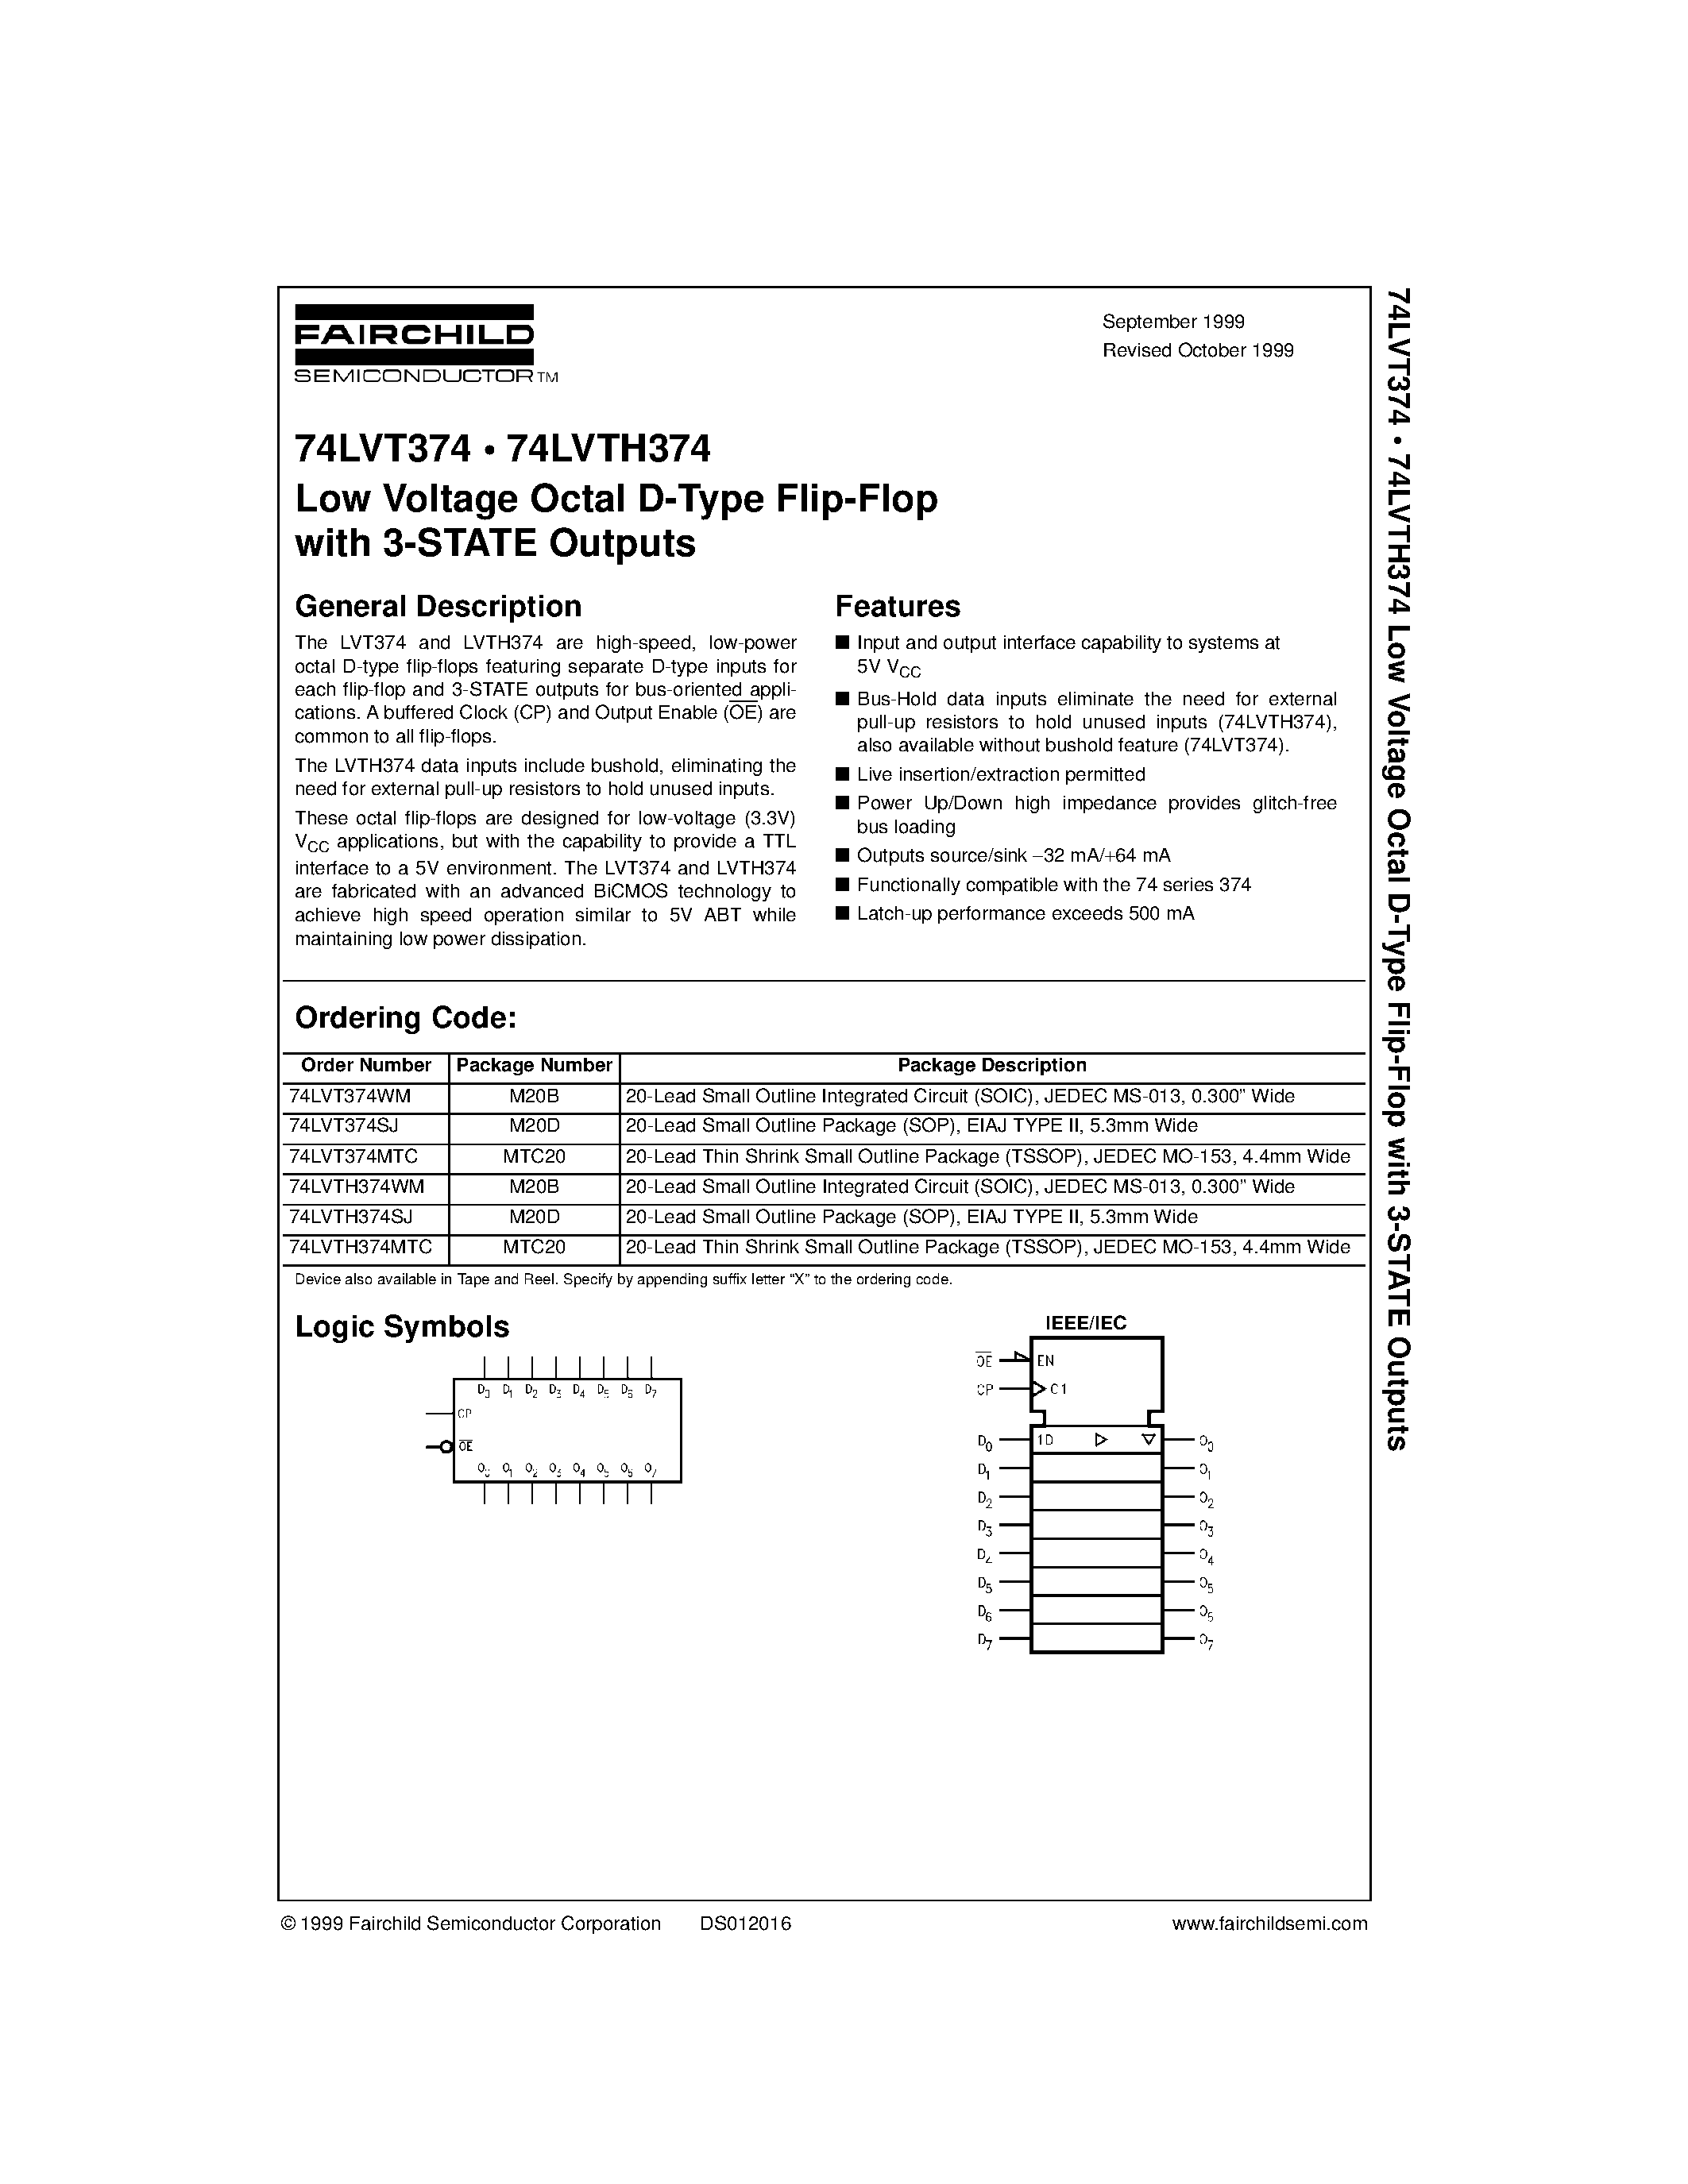 Datasheet 74LVT374 - Low Voltage Octal D-Type Flip-Flop with 3-STATE Outputs page 1